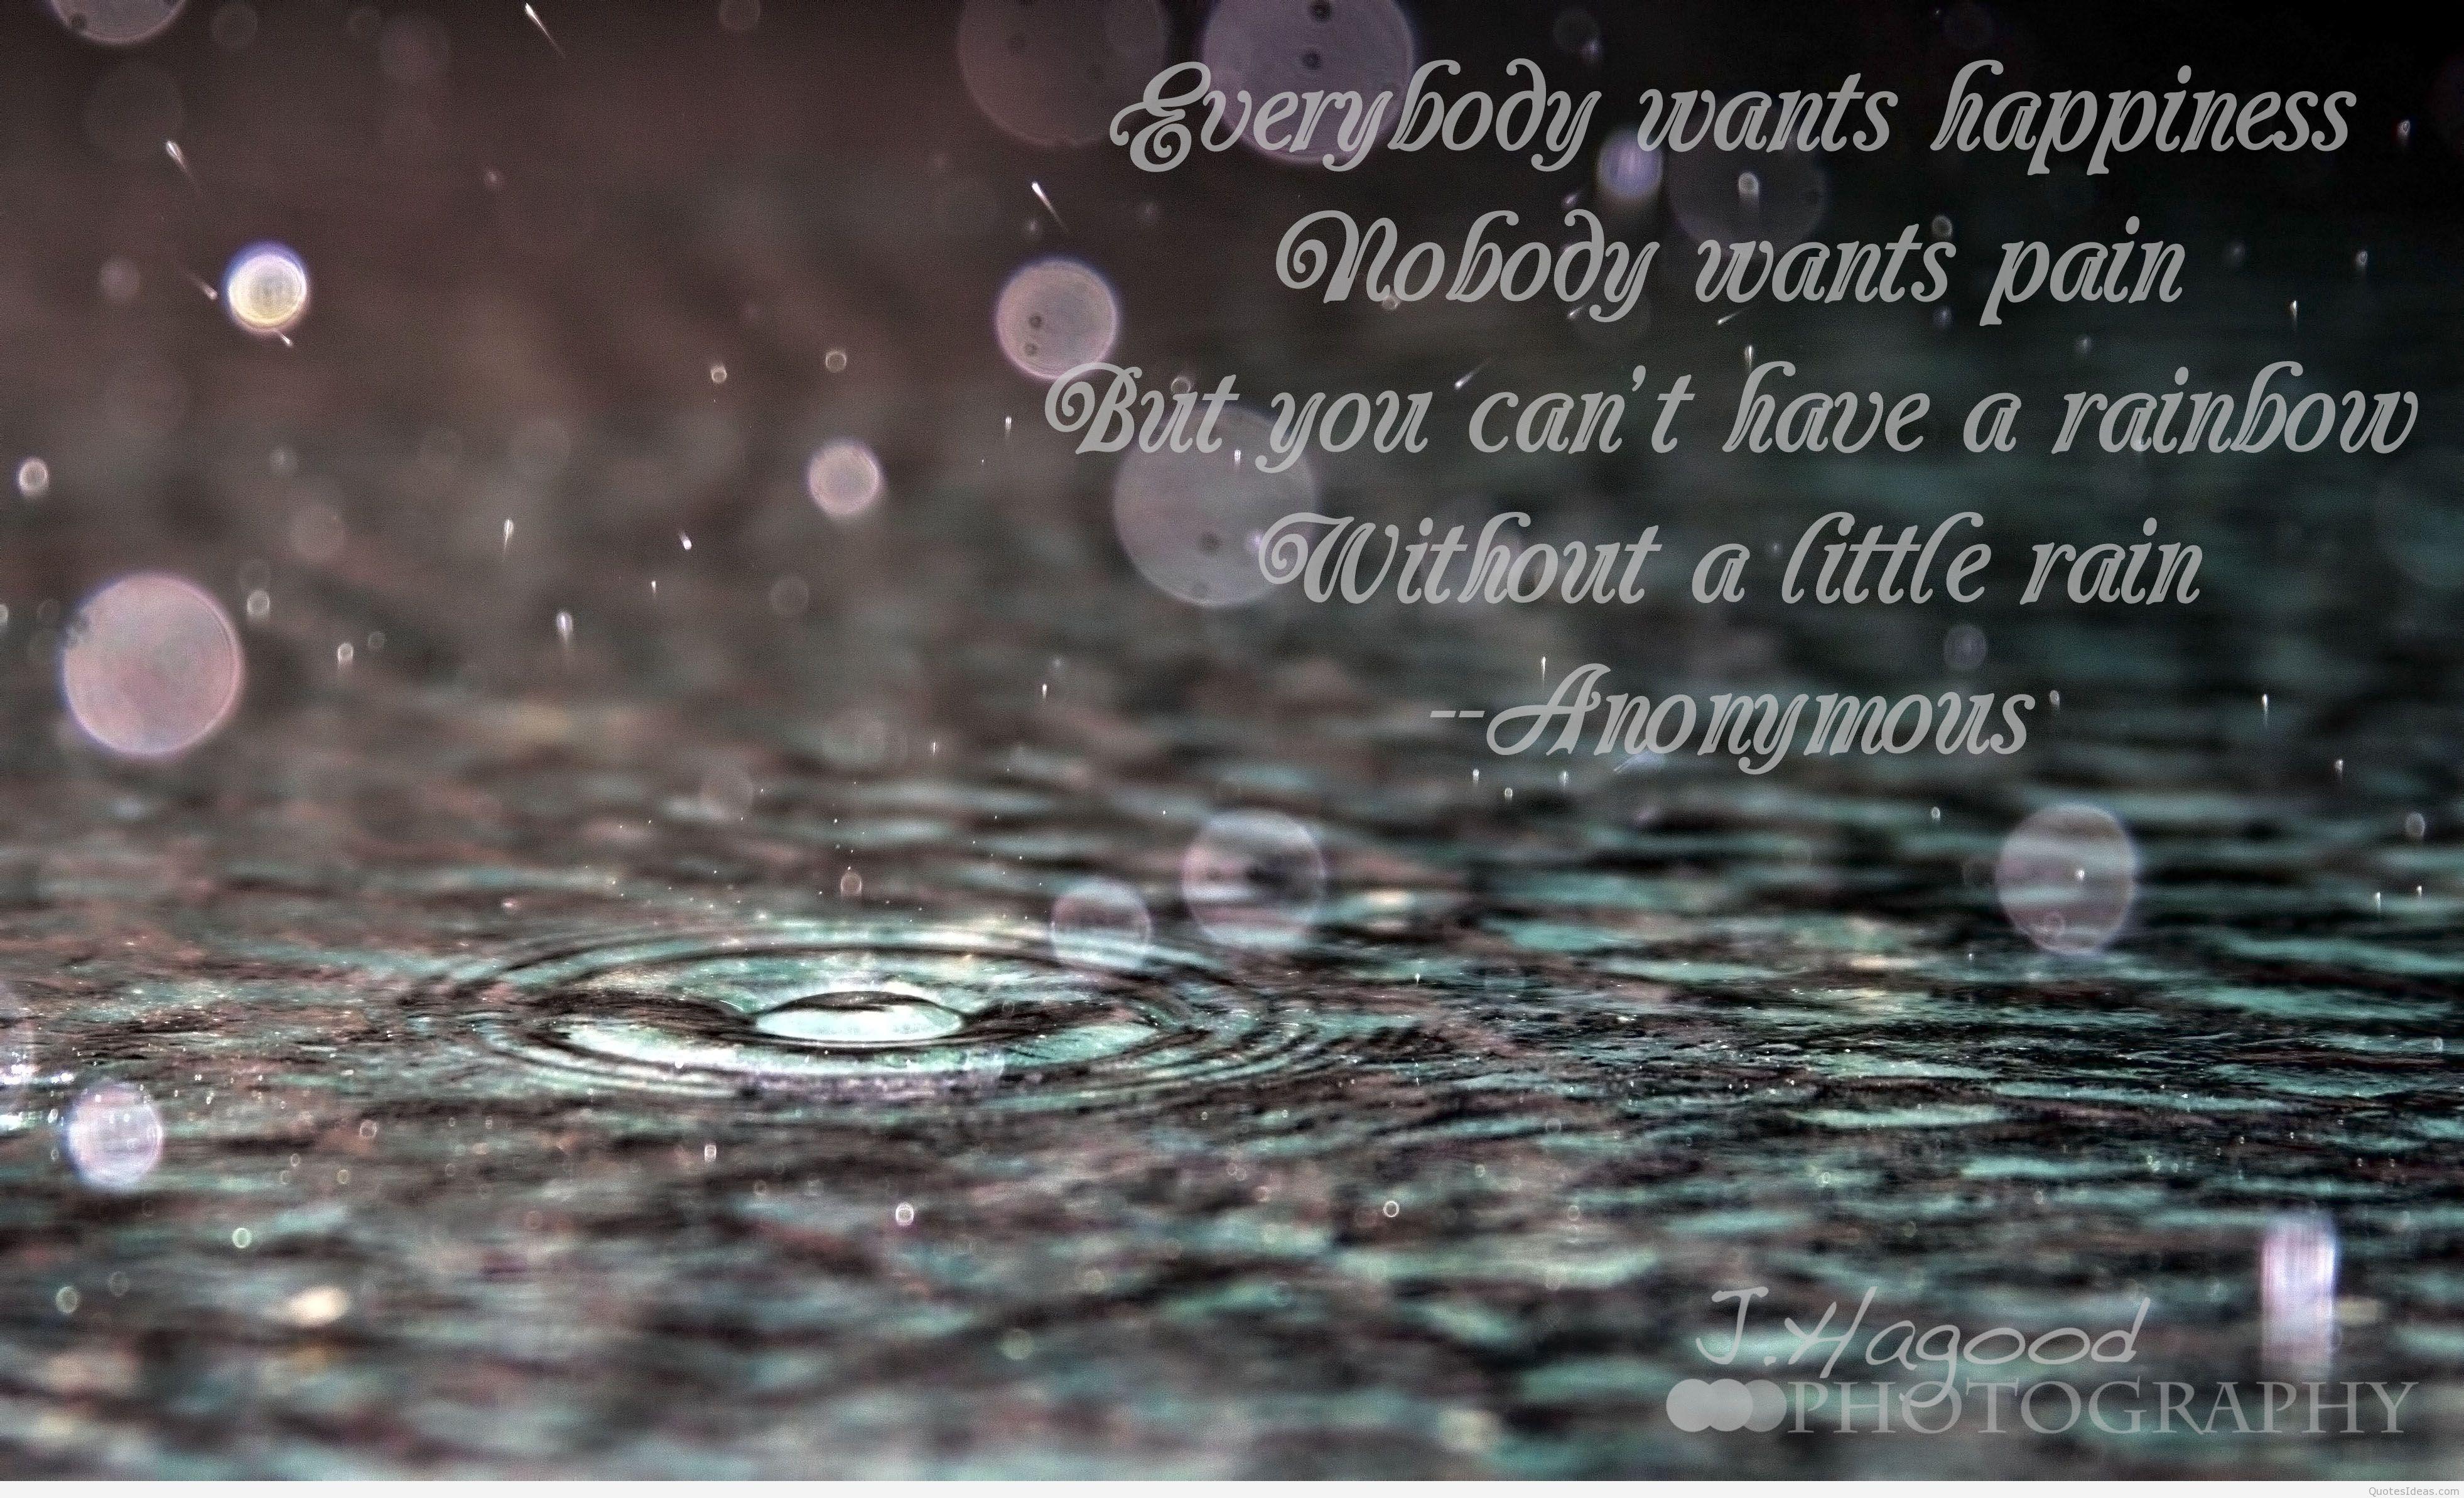 Quotes Rainy Days Wallpapers - ntbeamng